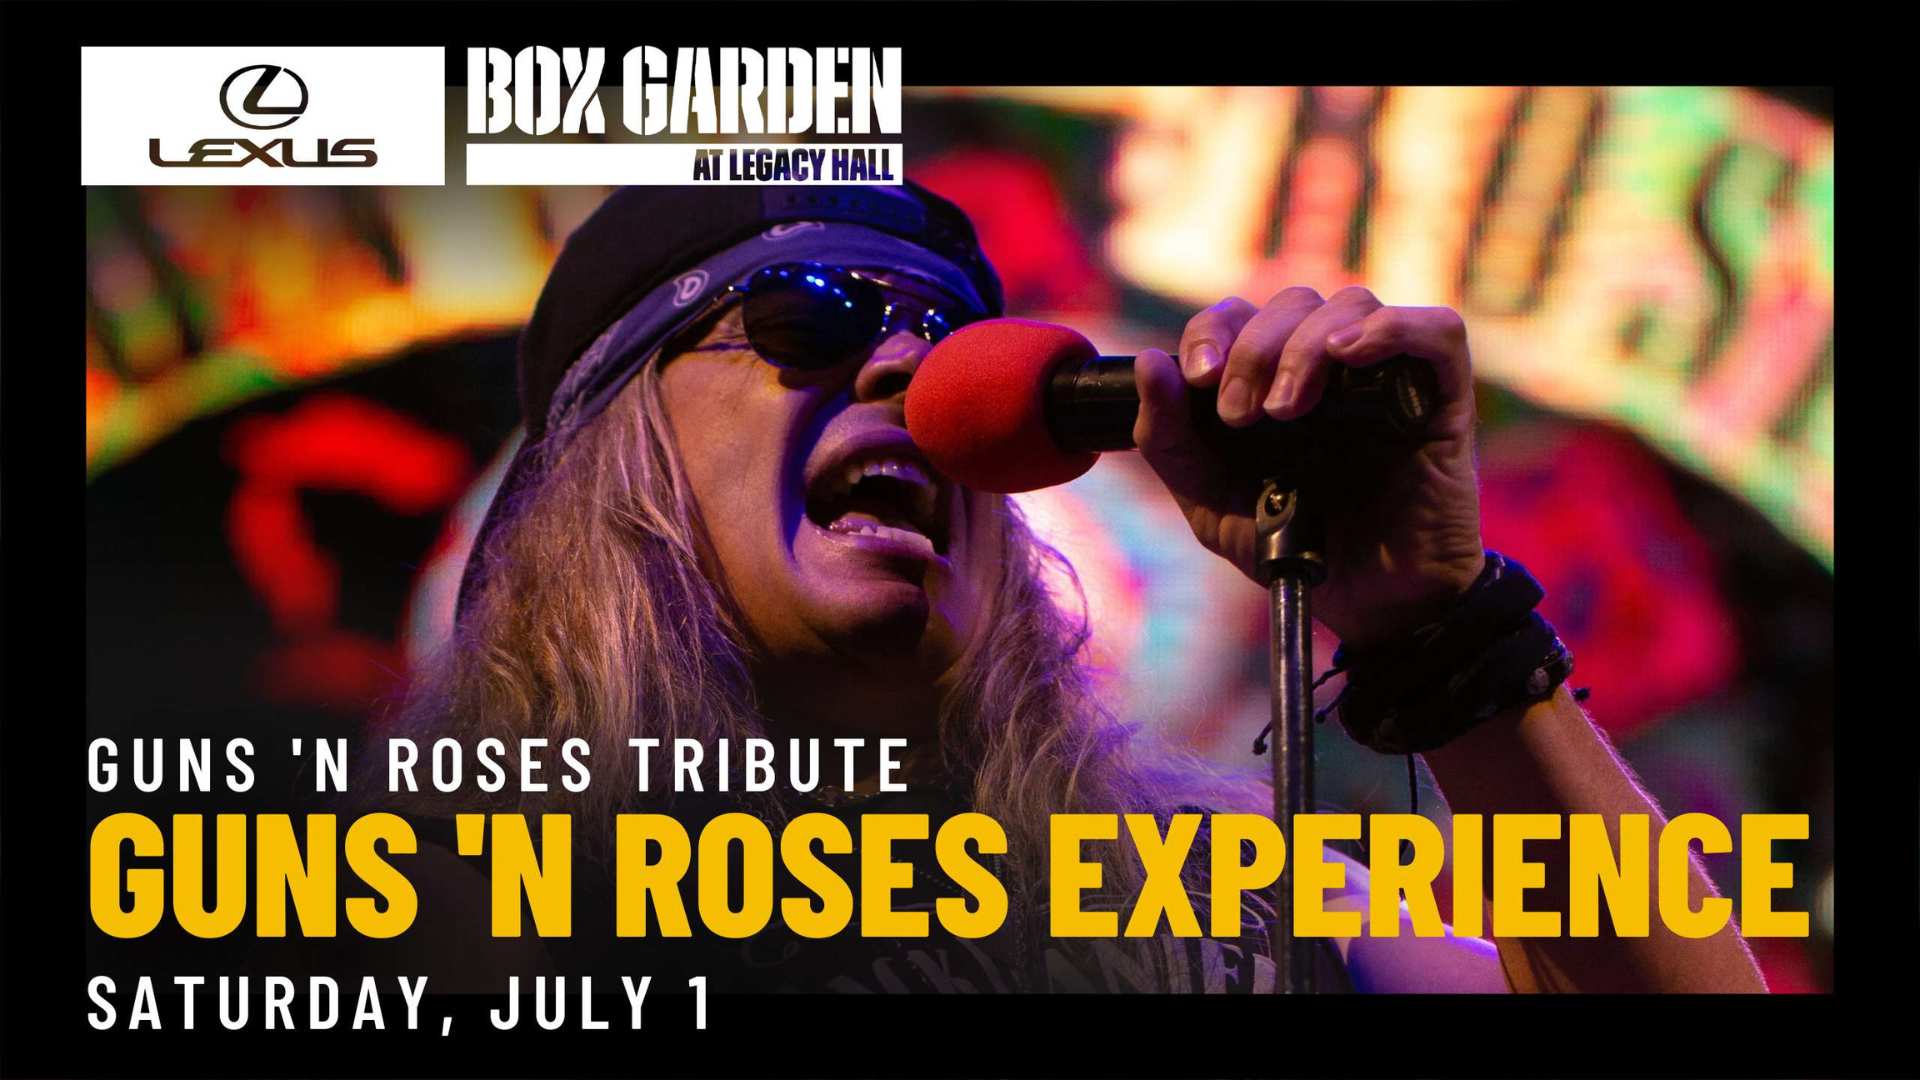 Promo image of The Guns ‘N Roses Experience